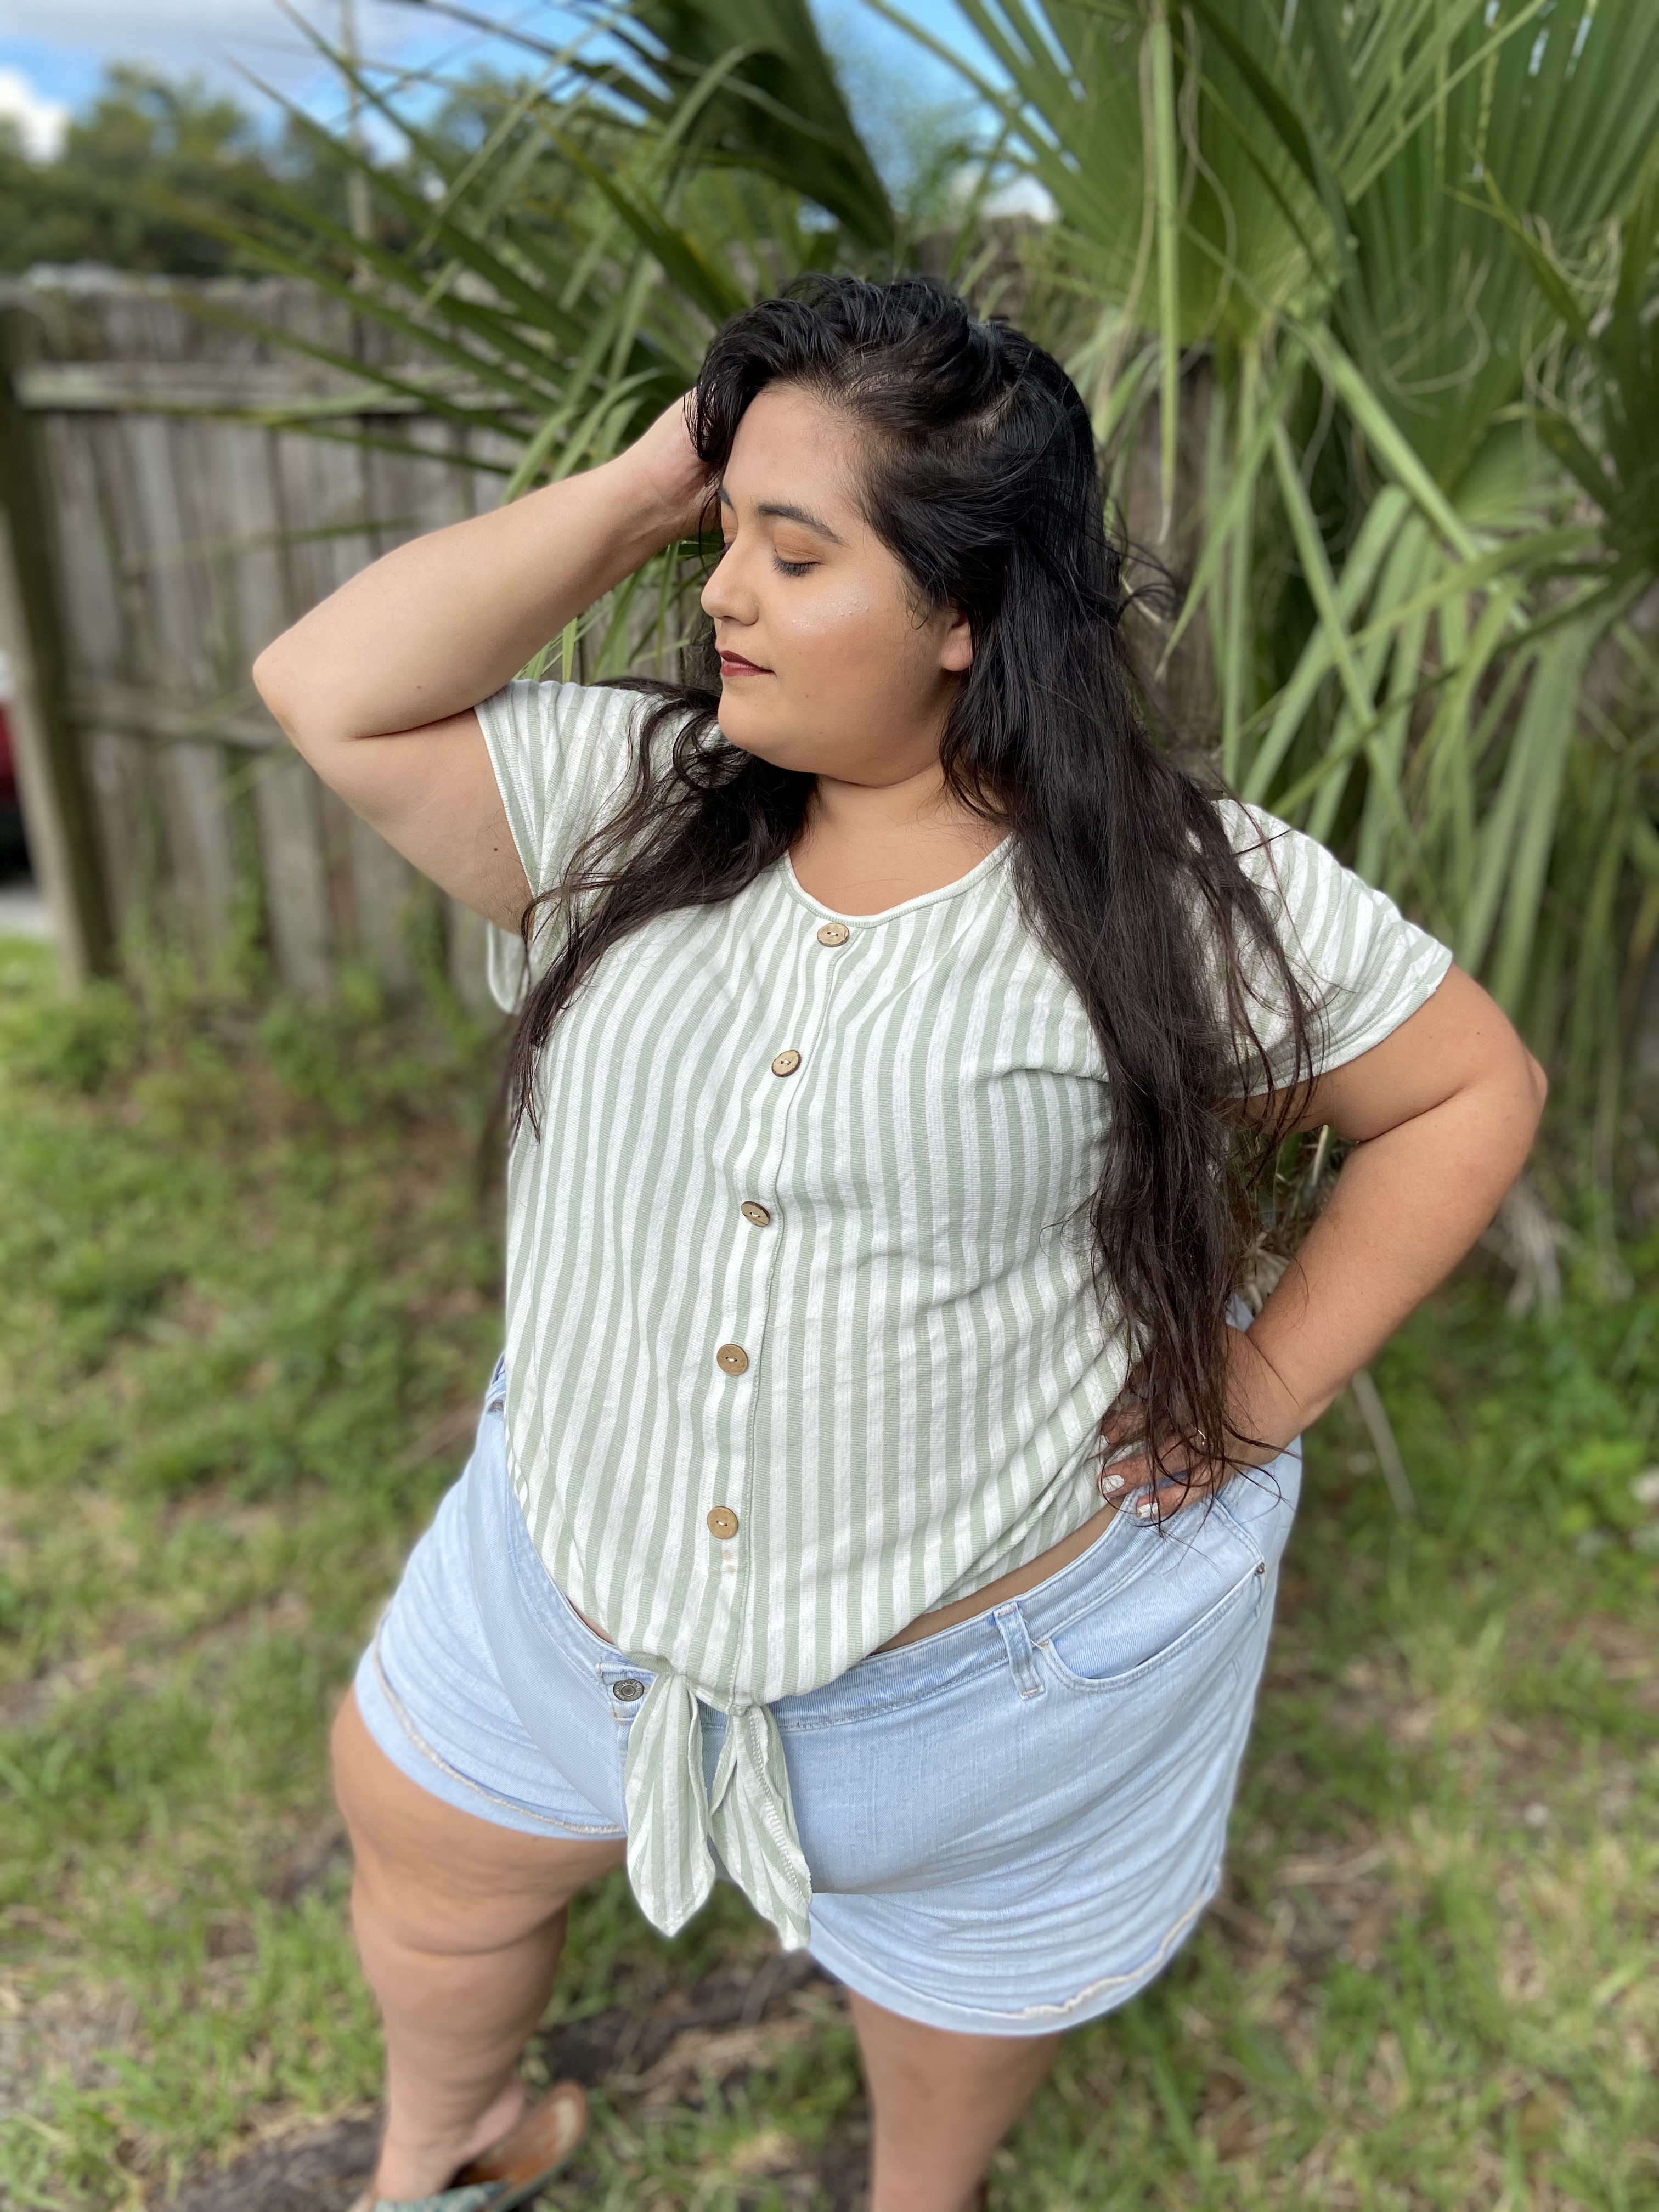 Outfits For Less | Summer Tops Under $13